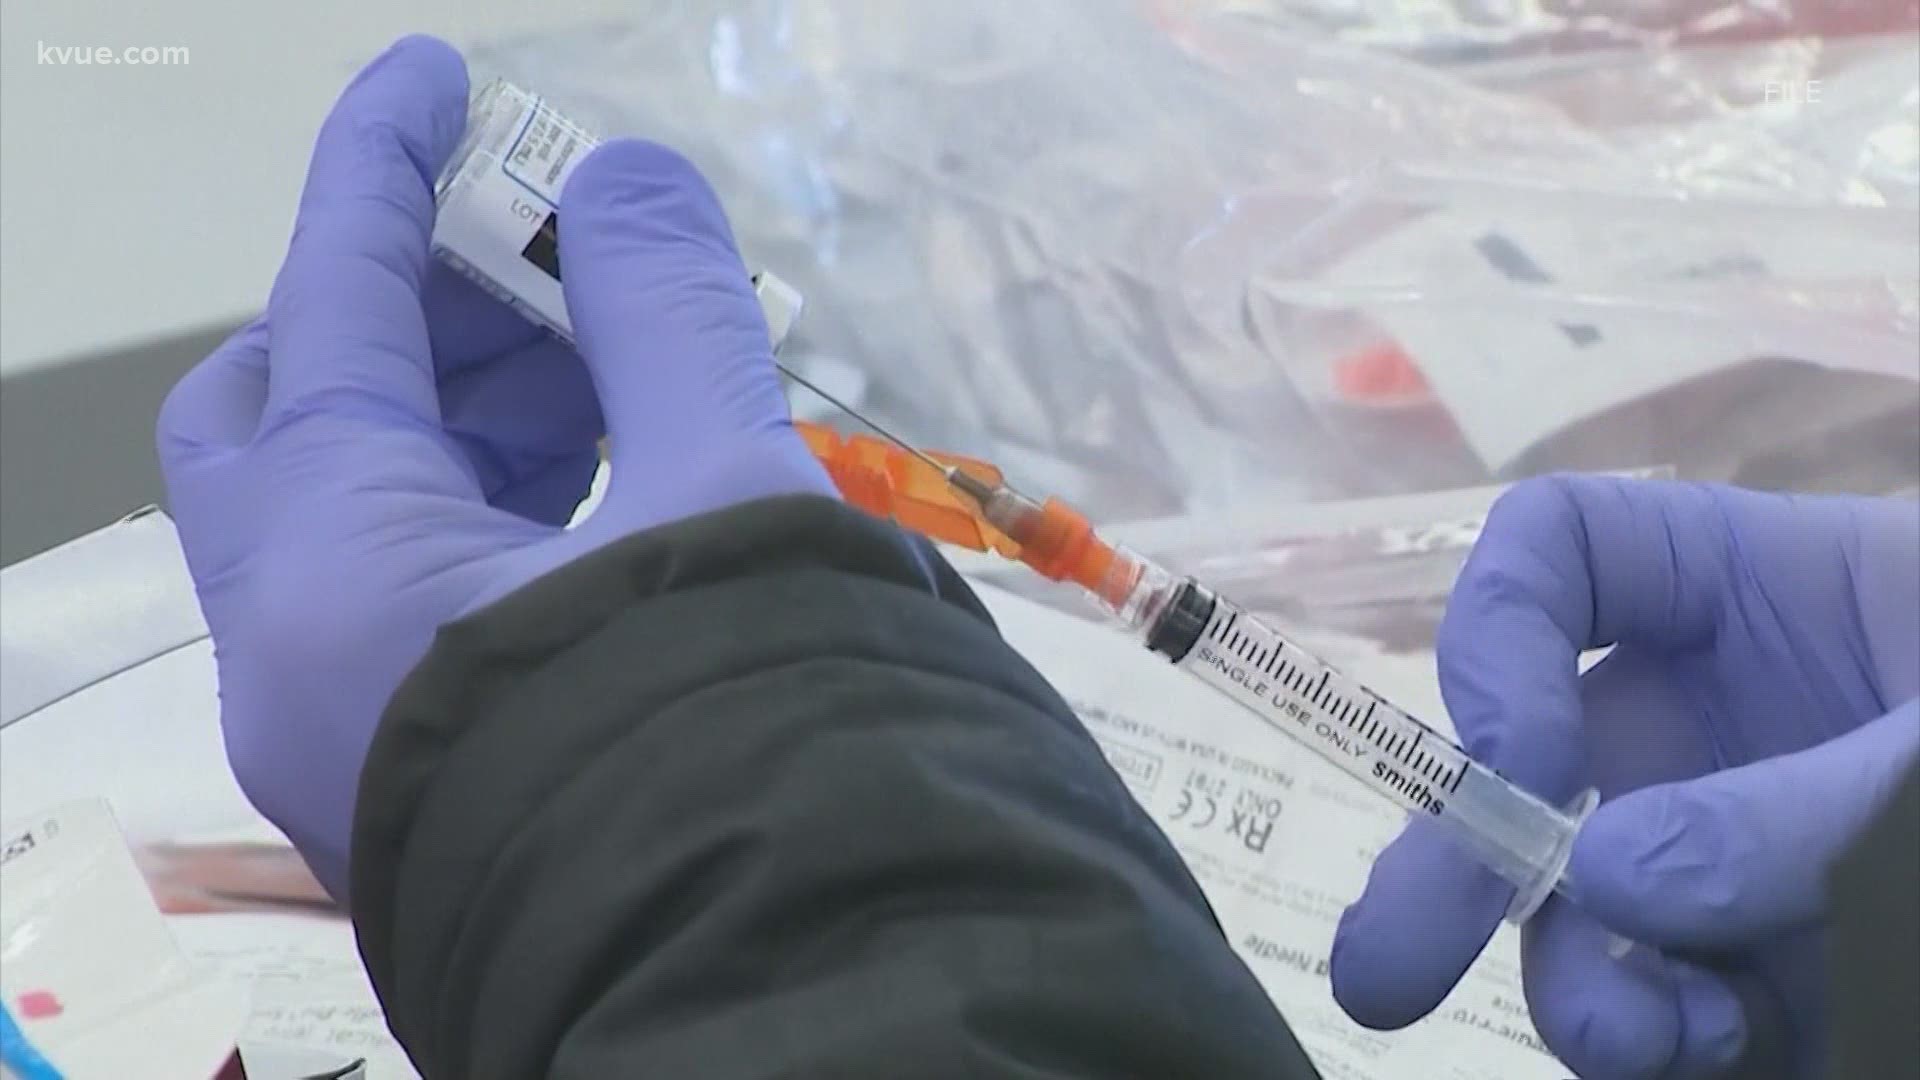 More than 8 million Texans have received at least one dose of COVID-19 vaccine.